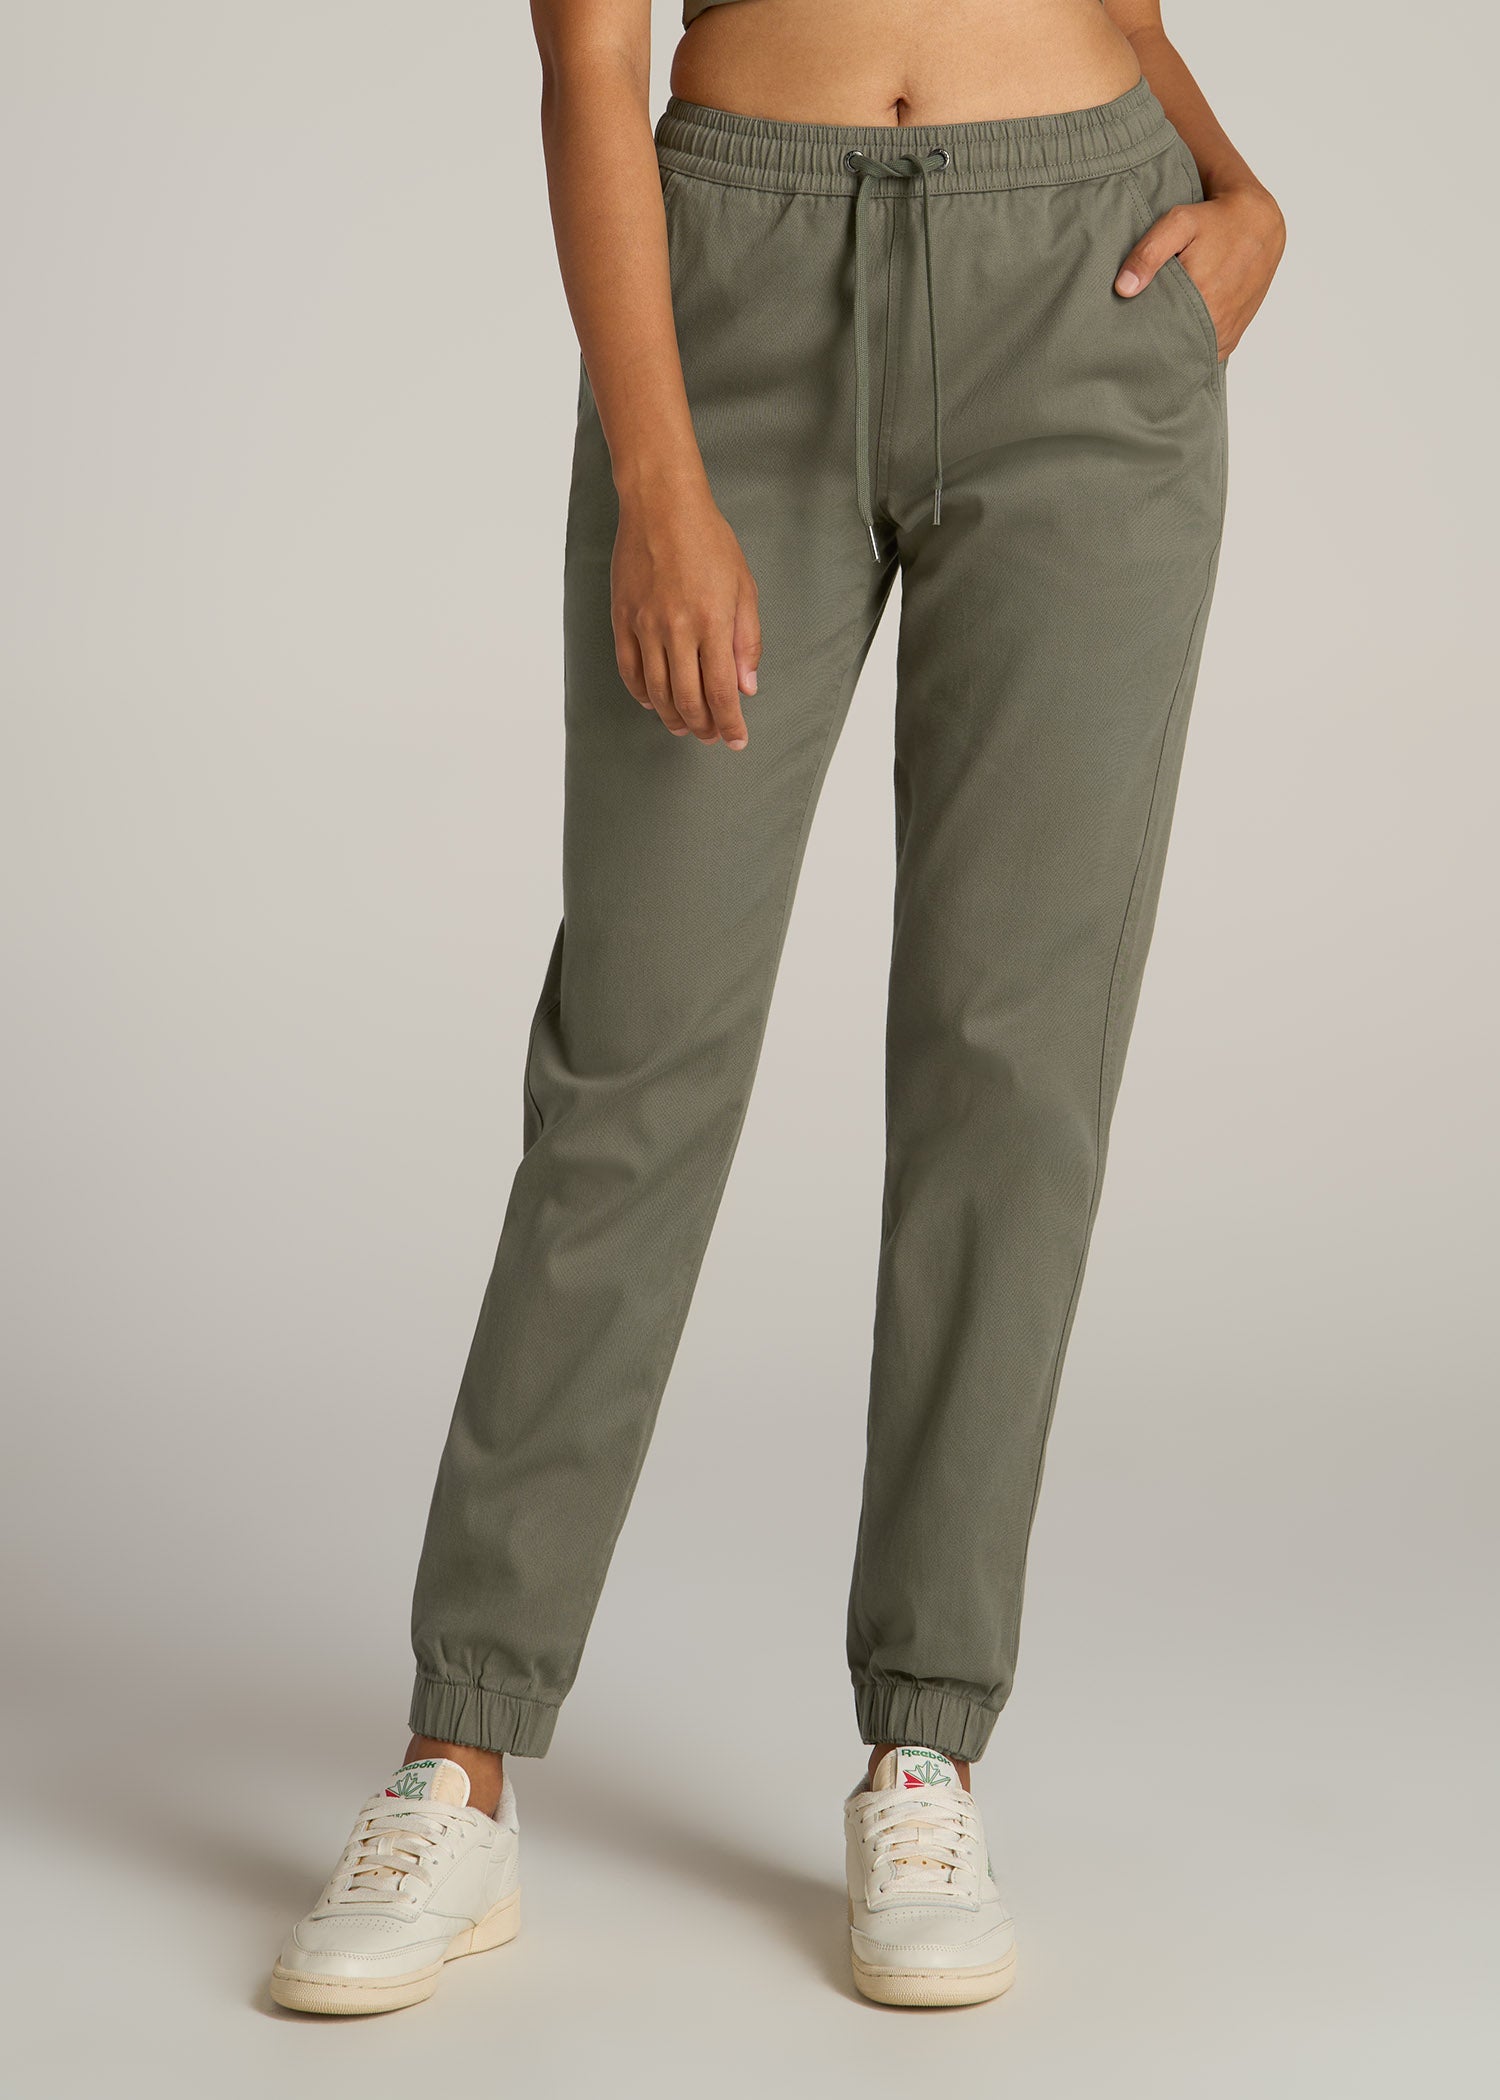 Twill Jogger Pants for Tall Women in Olive